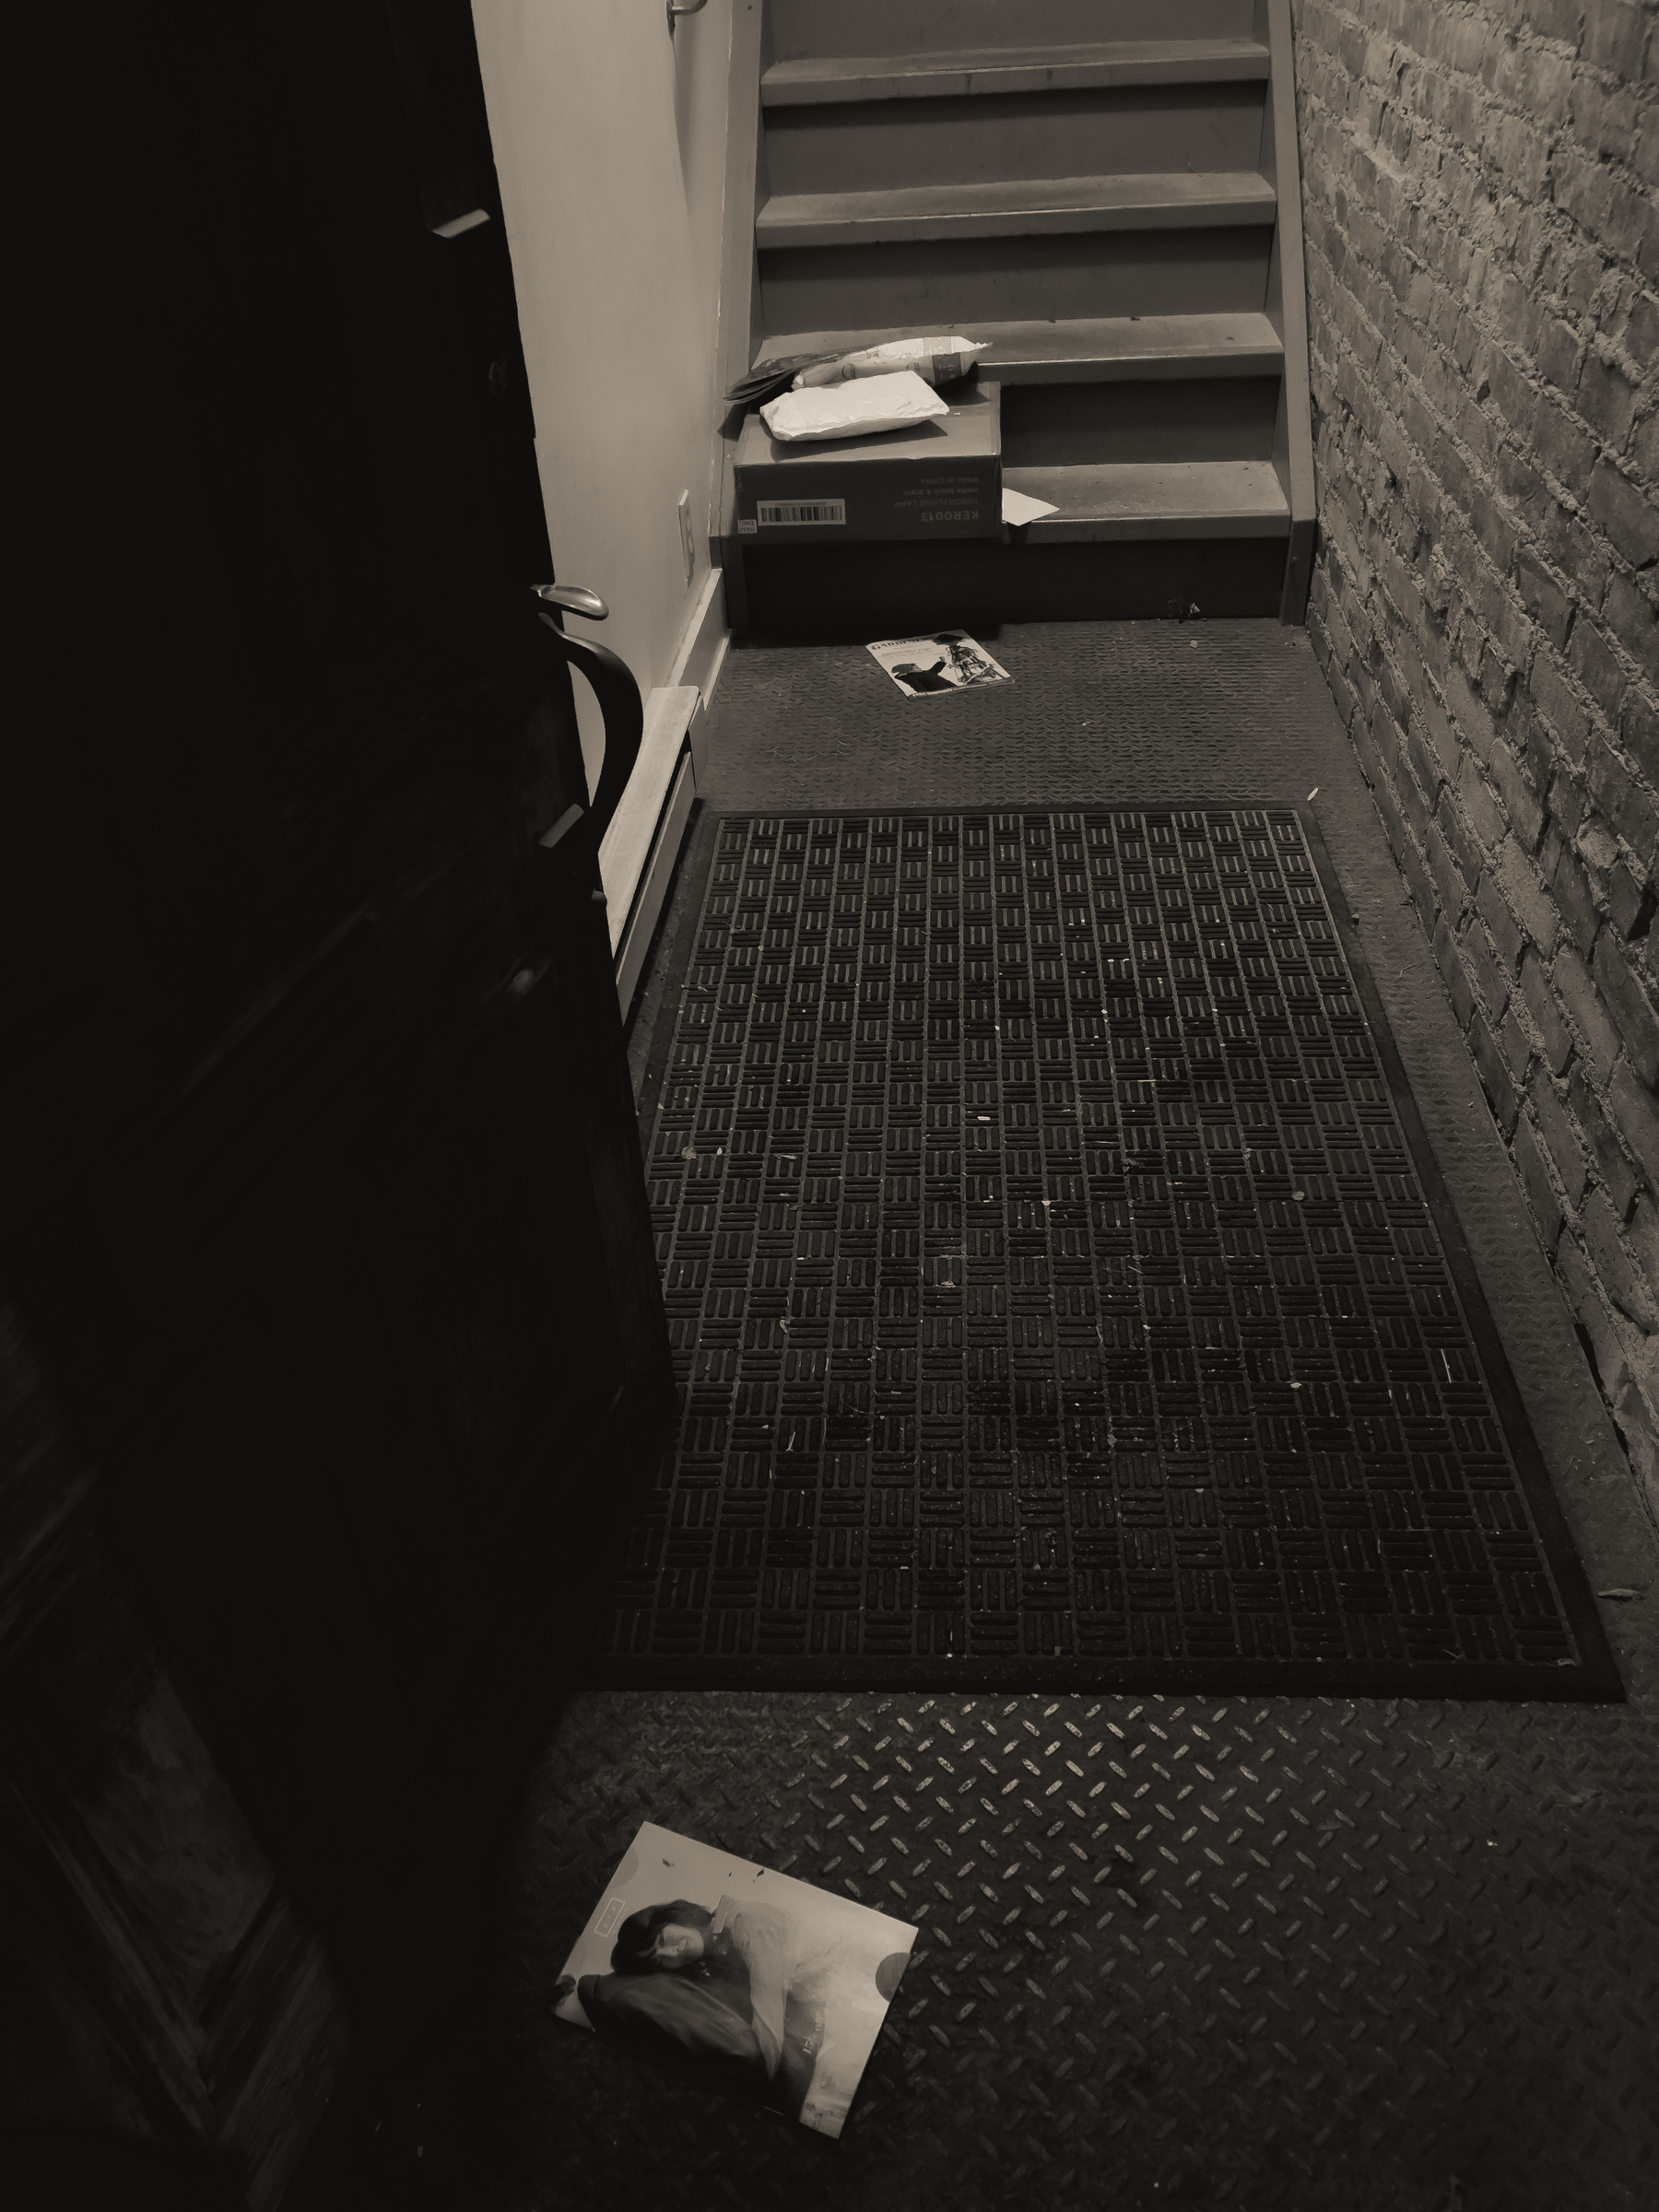 Entryway to apartment building with mail and packages strewn on the floor and stairs to upper floors in background.